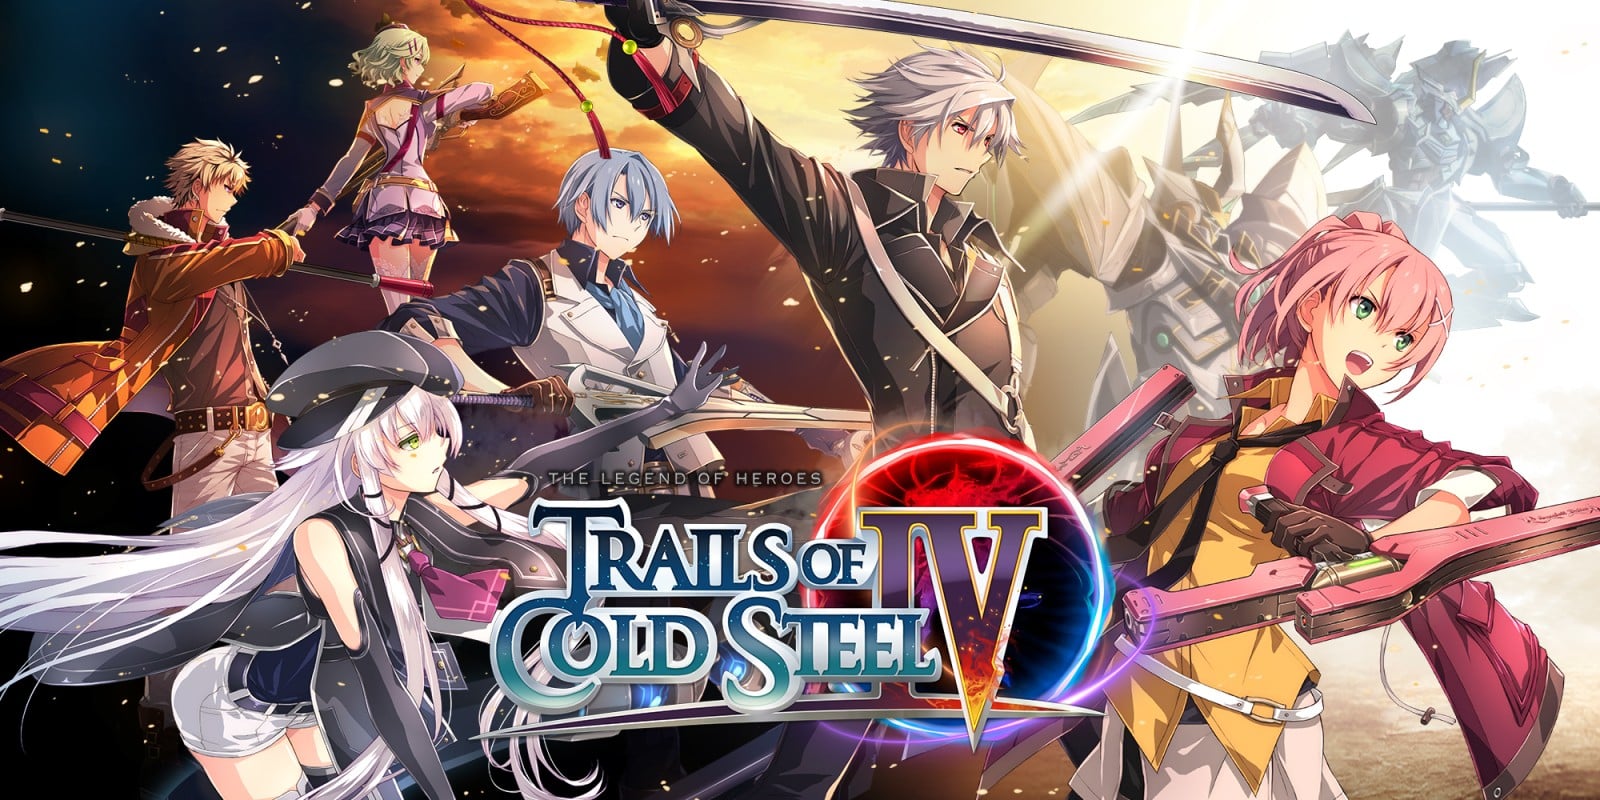 The Legend Of Heroes Trails Of Cold Steel 4